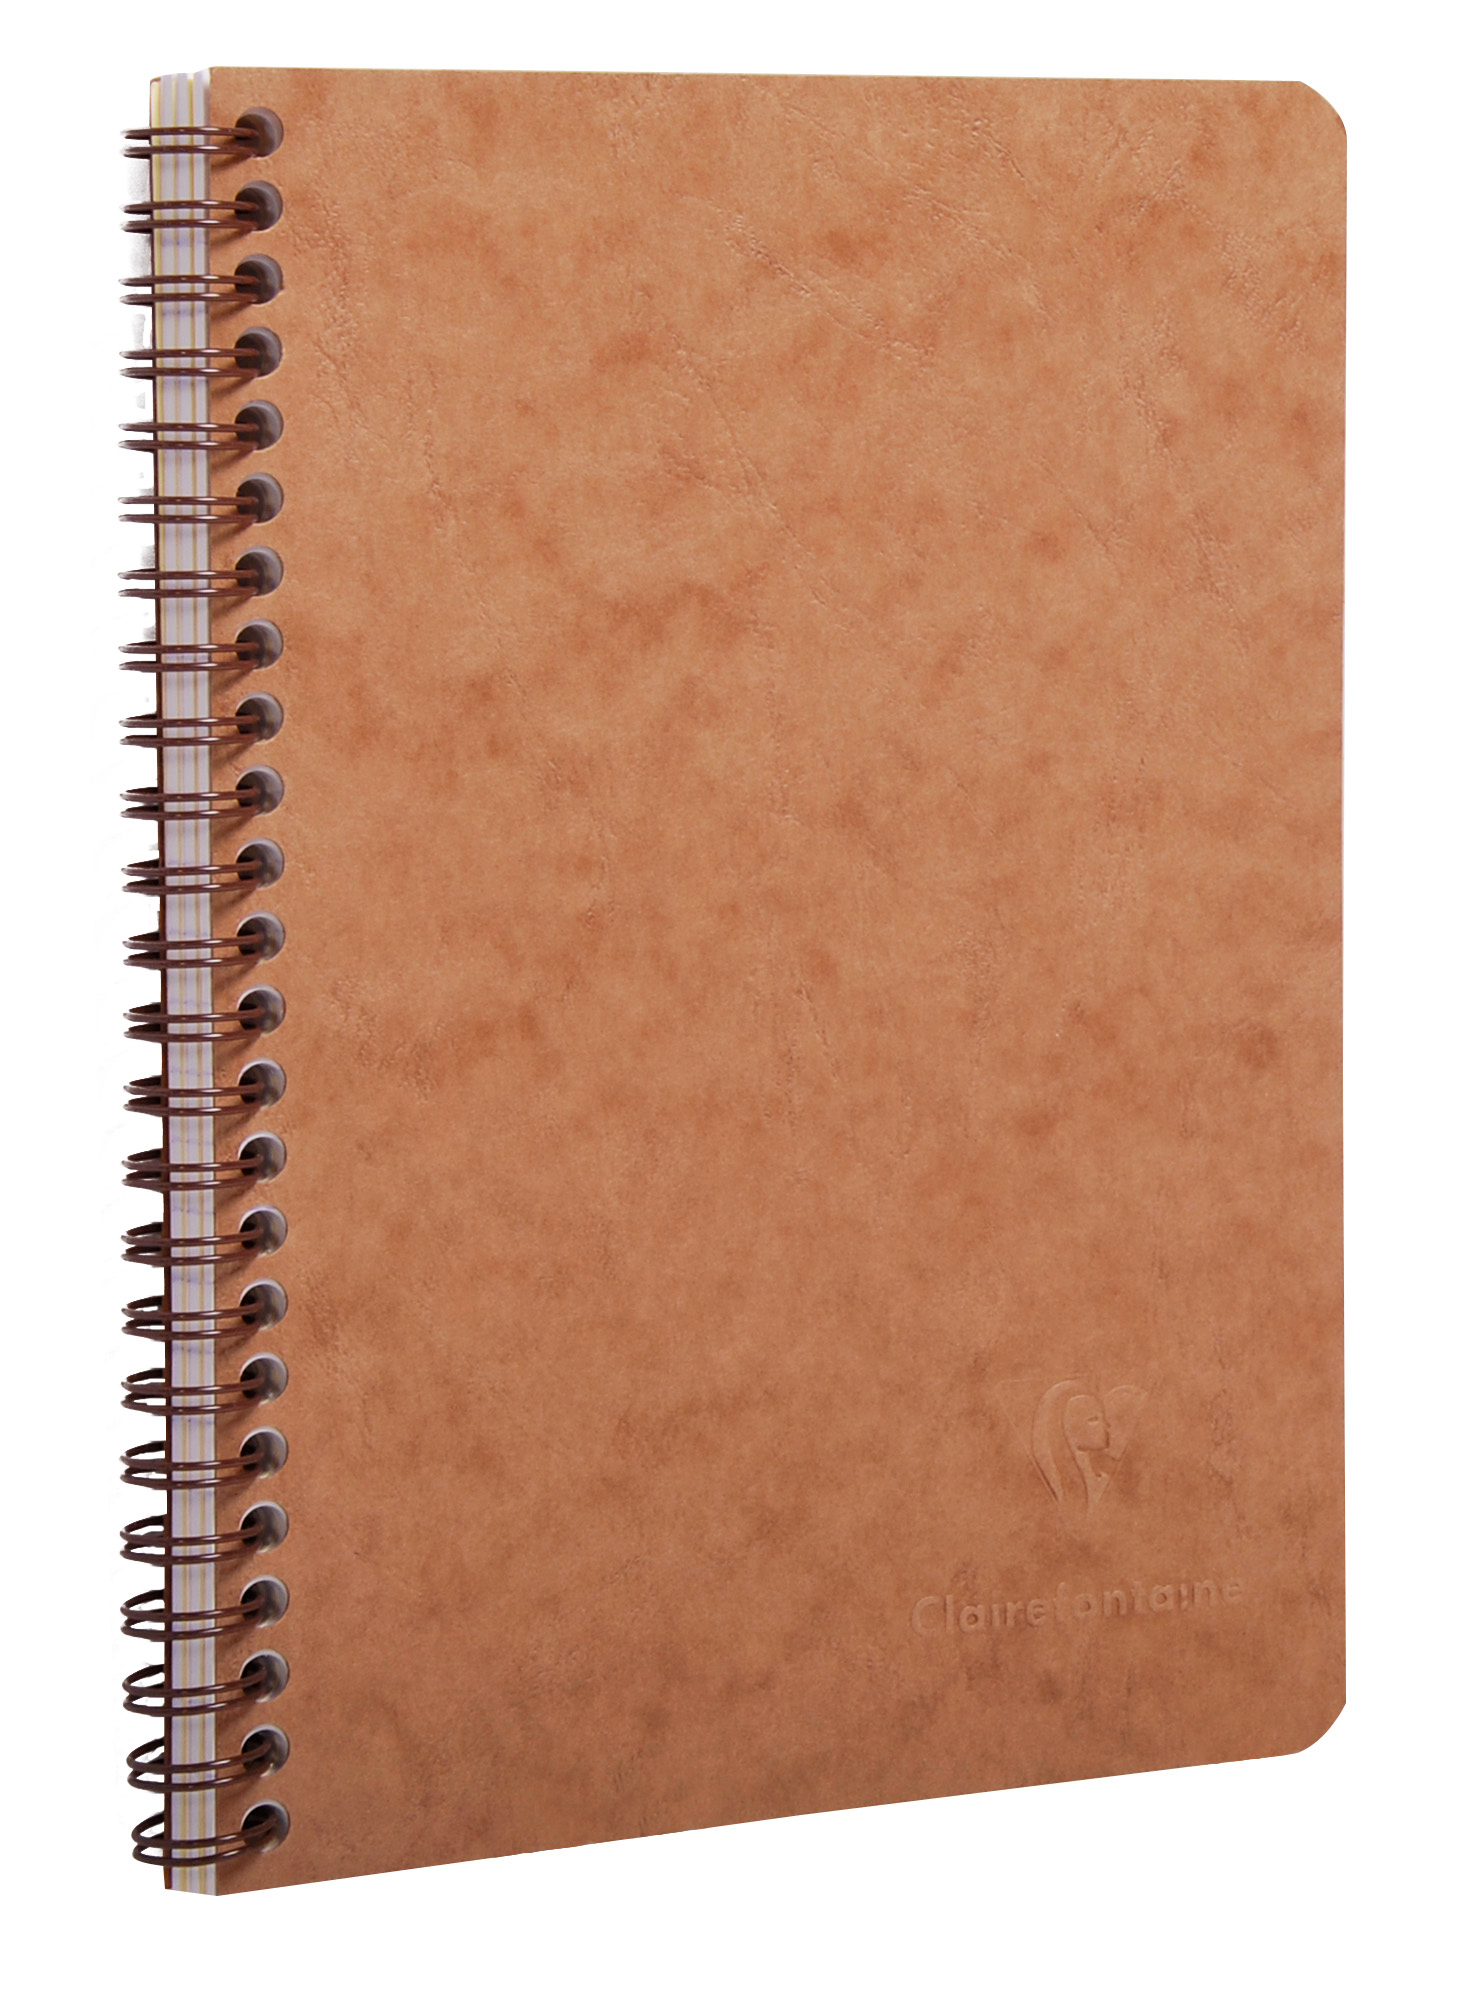 CLAIREFONTAINE Age Bag Carnet spirale A5 78566 90g 60 feuilles